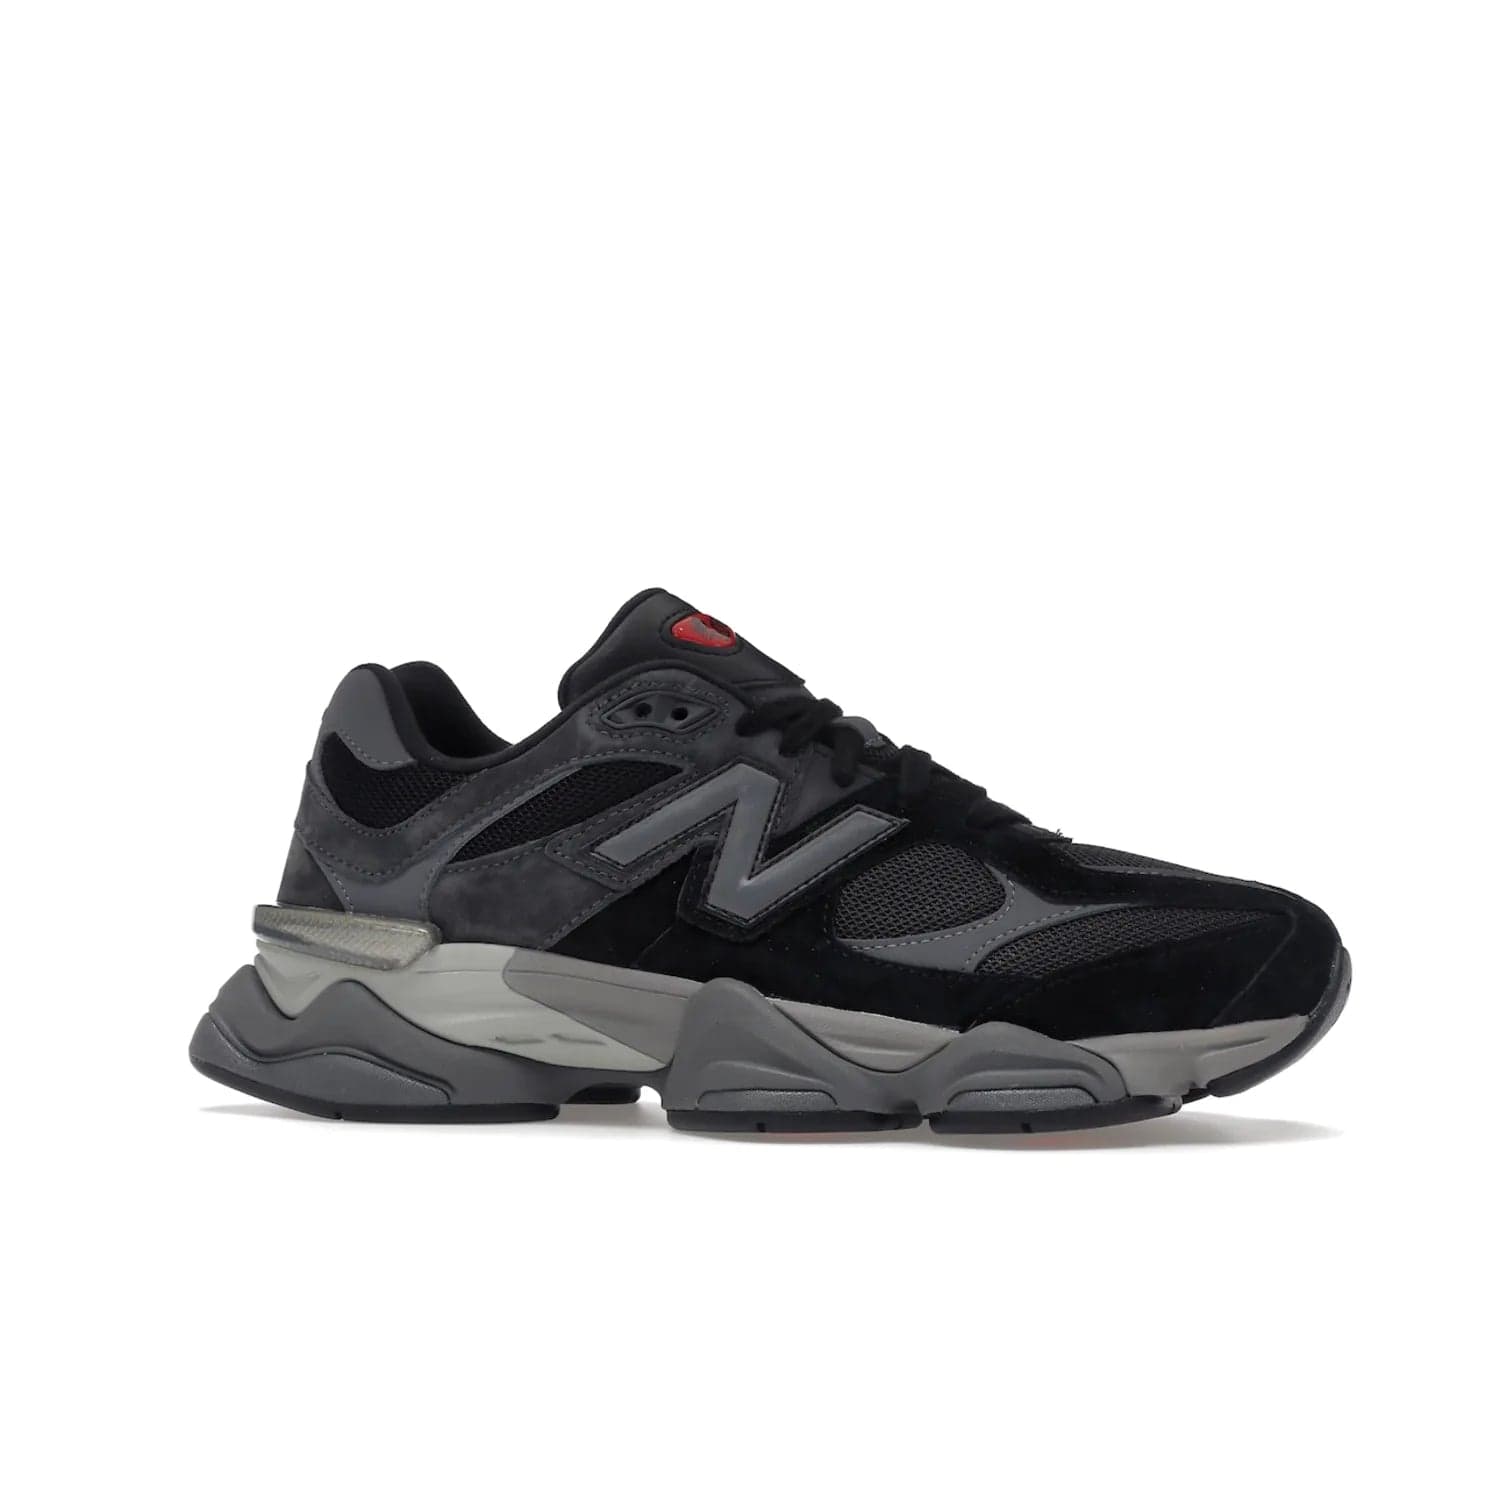 New Balance 9060 Black Castlerock Grey - Image 3 - Only at www.BallersClubKickz.com - New Balance 9060: Inspired by a 90s classic - black mesh upper with pigskin suede and leather overlays, "N" branding, CR device heel, chunky dual-density midsole with ABZORB and SBS cushioning technology, released in September 2022 at a retail price of $150.